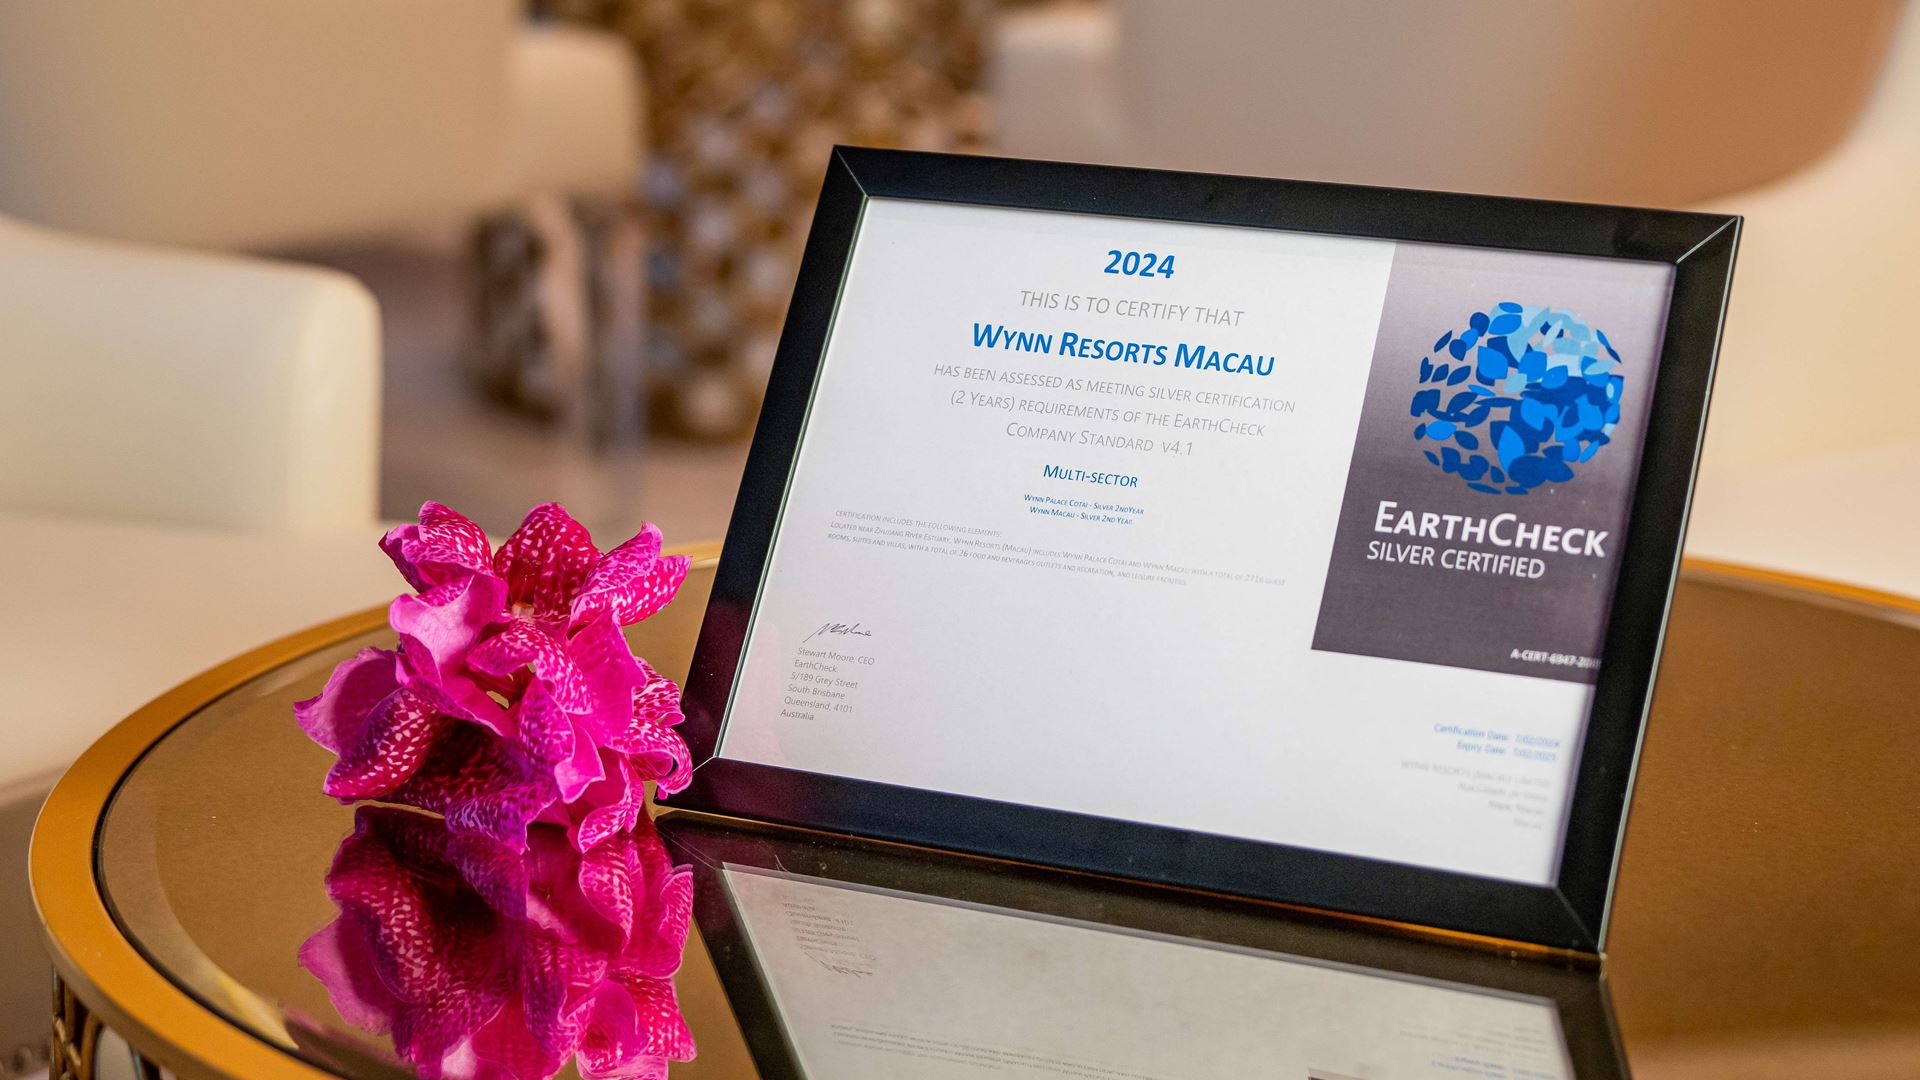 Wynn Macau and Wynn Palace are awarded a second Silver Certification from EarthCheck